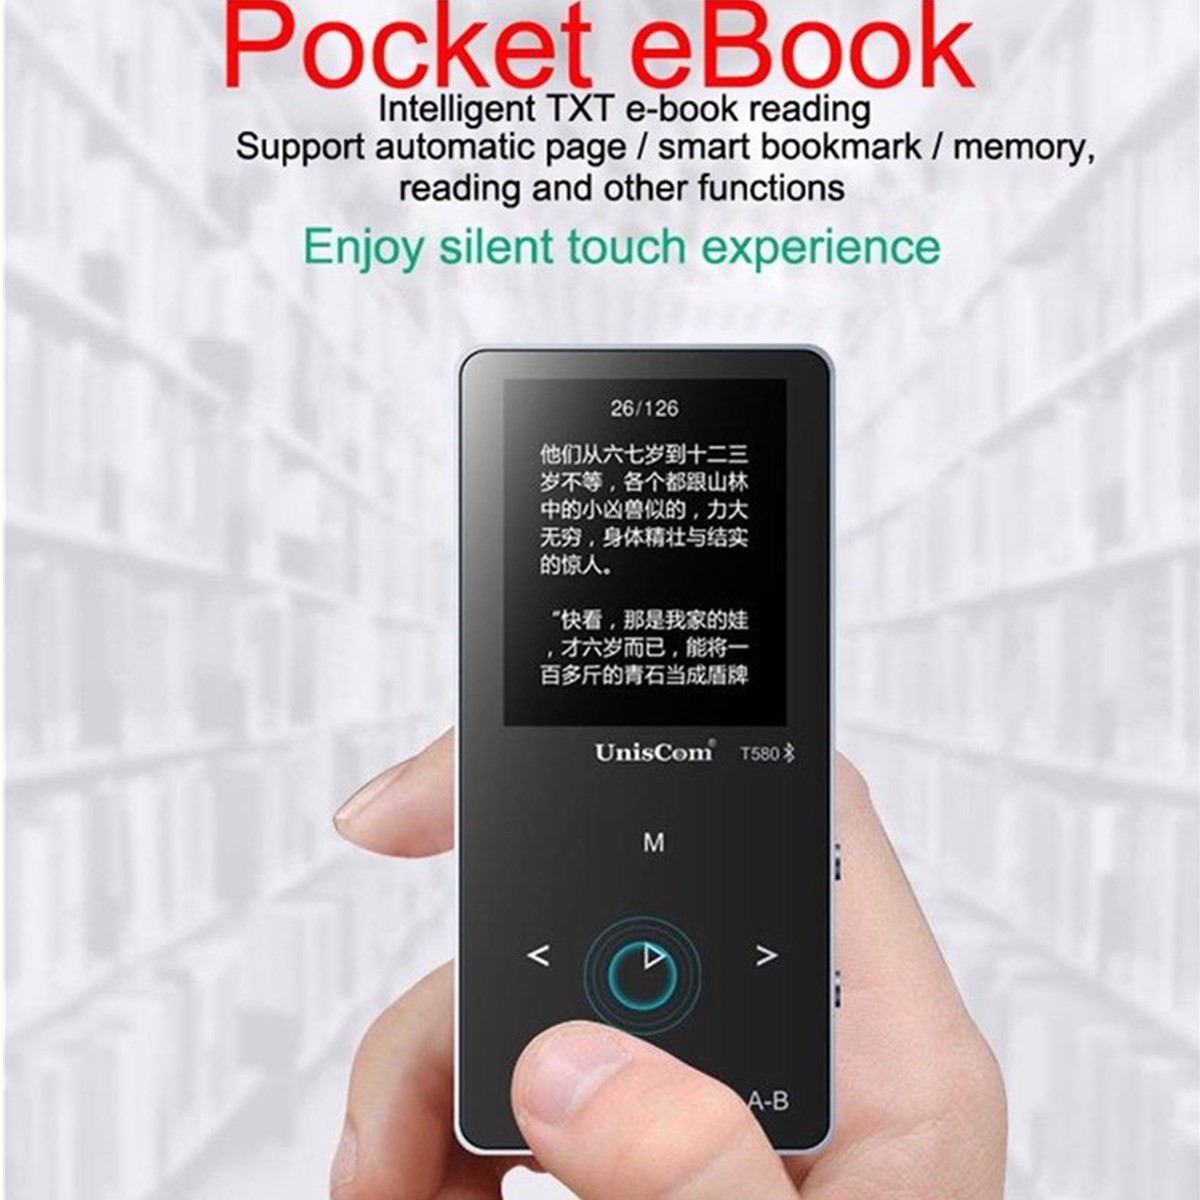 Uniscom 8G 1.8 Inch Screen bluetooth Lossless HIFI MP3 Music Player Support A-B Repeat Voice Record 19